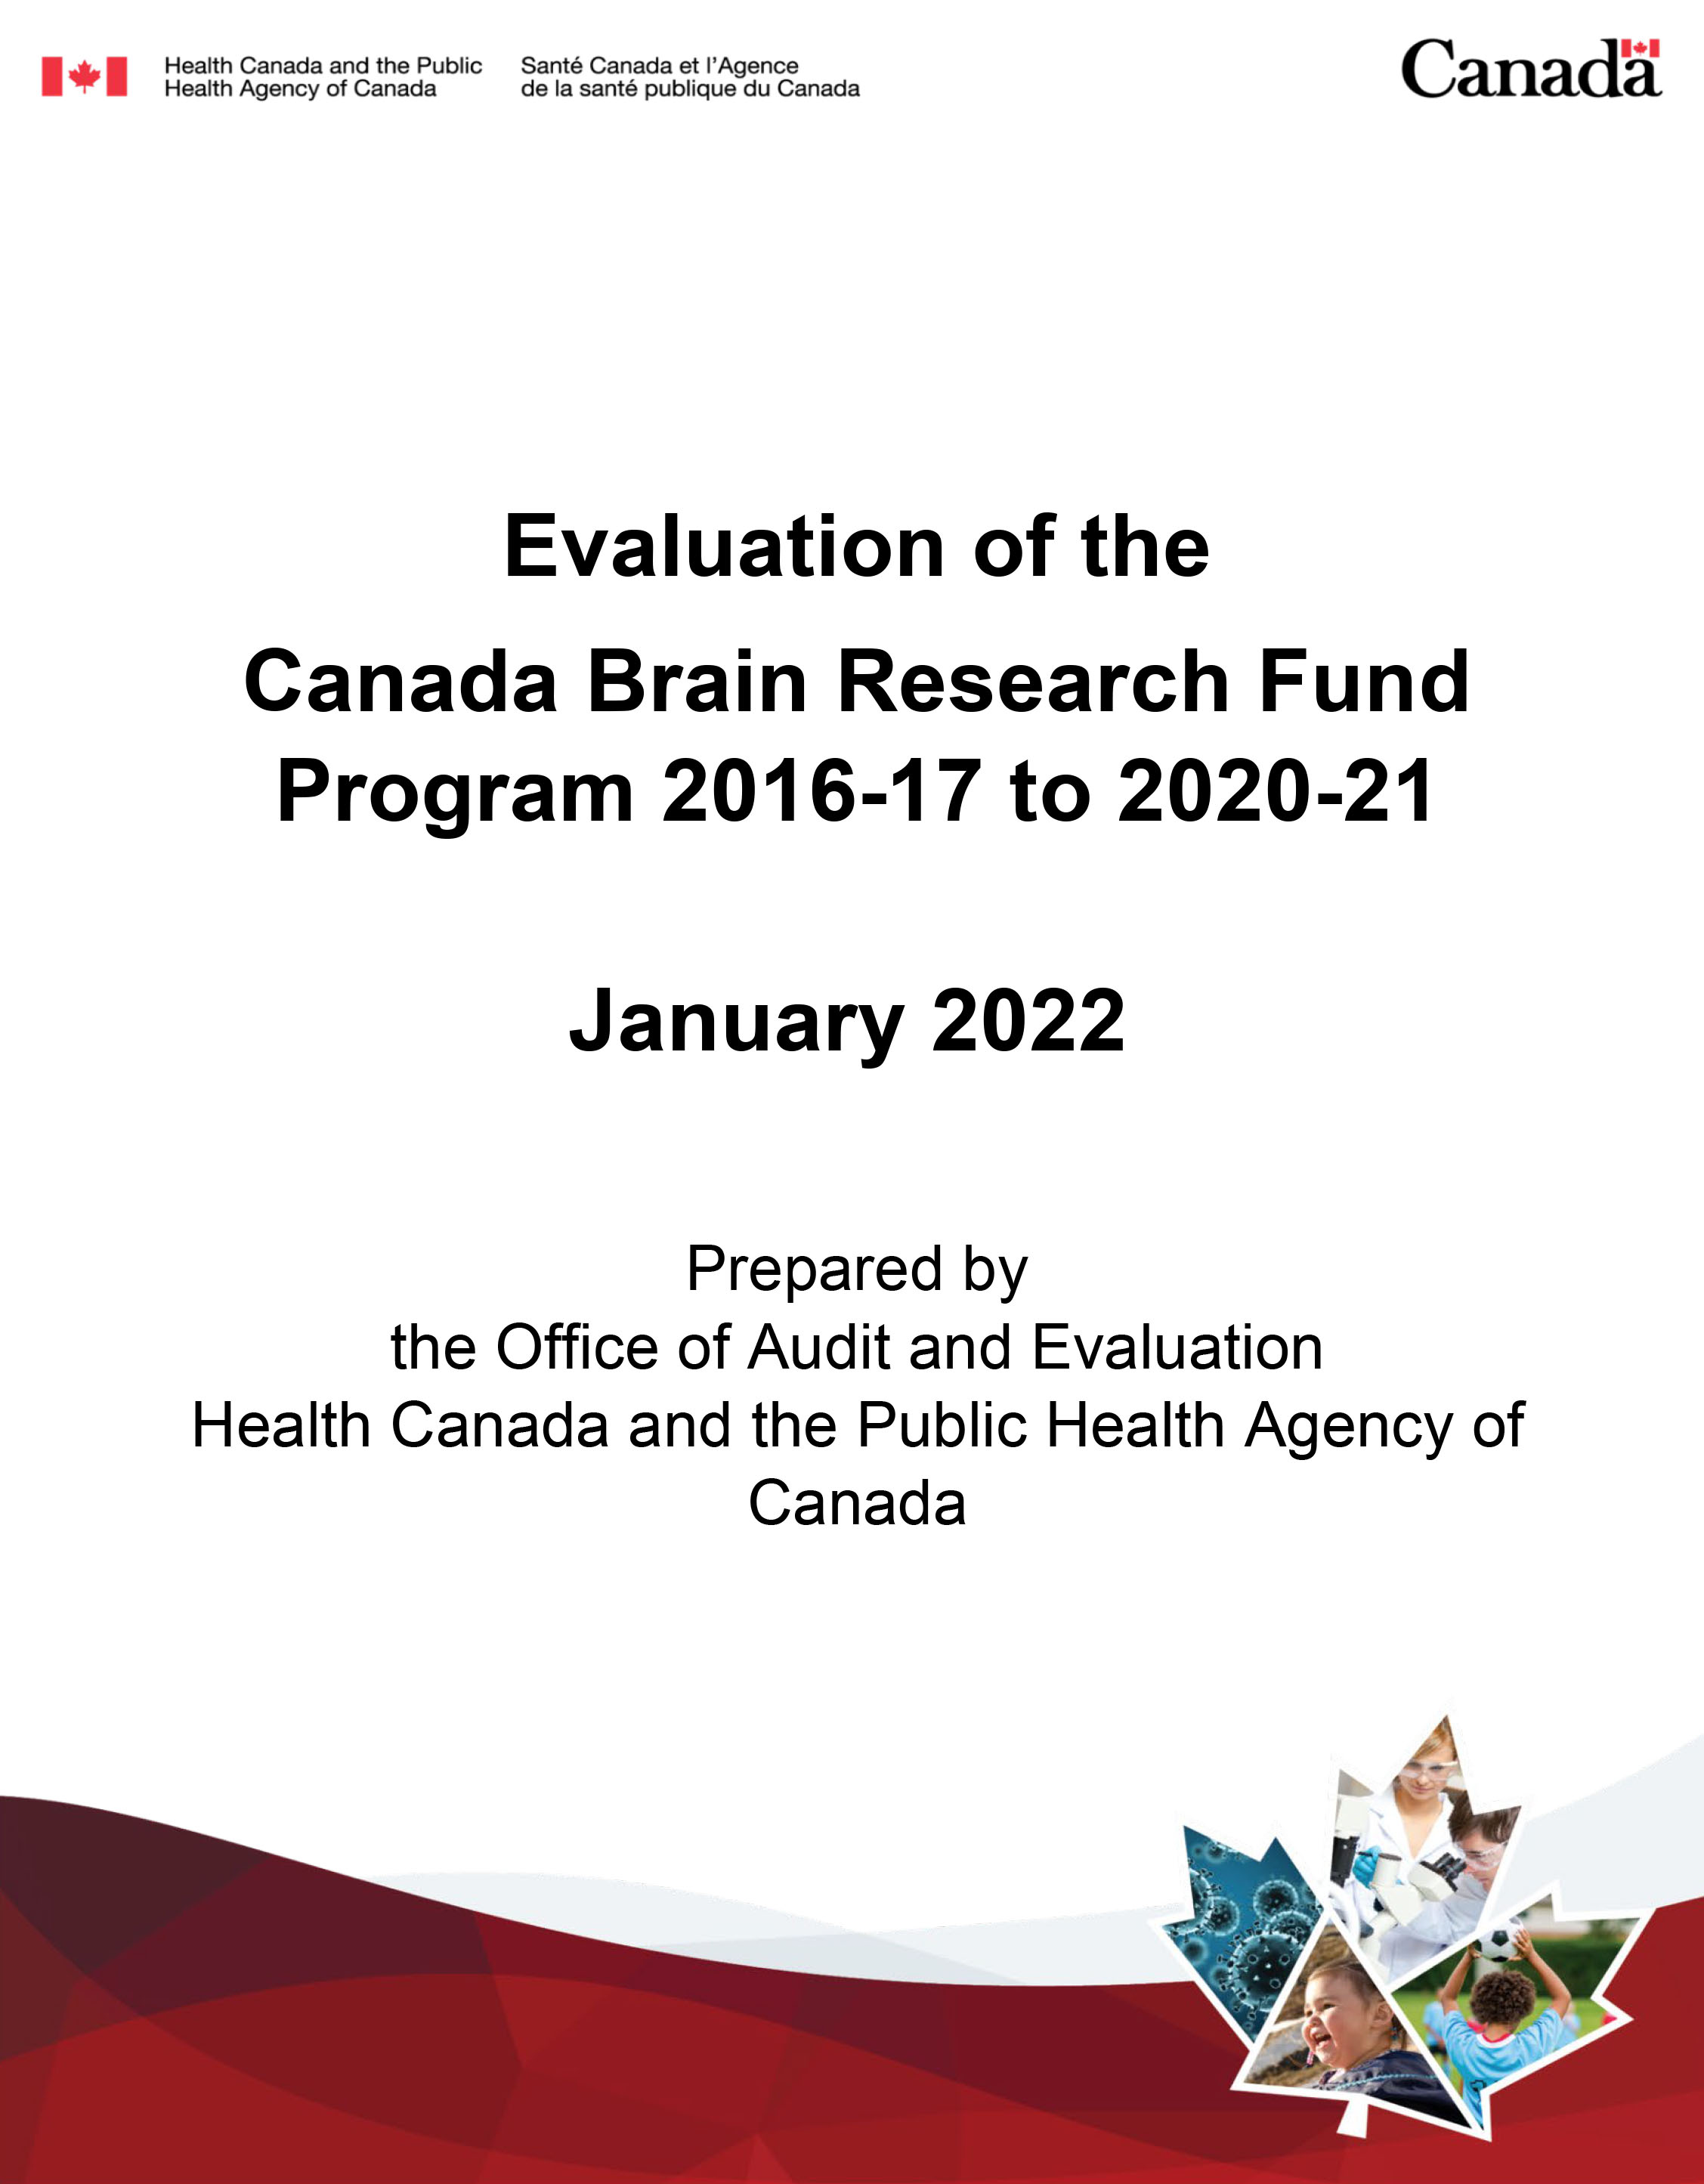 Evaluation of the Canada Brain Research Fund Program 2016-17 to 2020-21